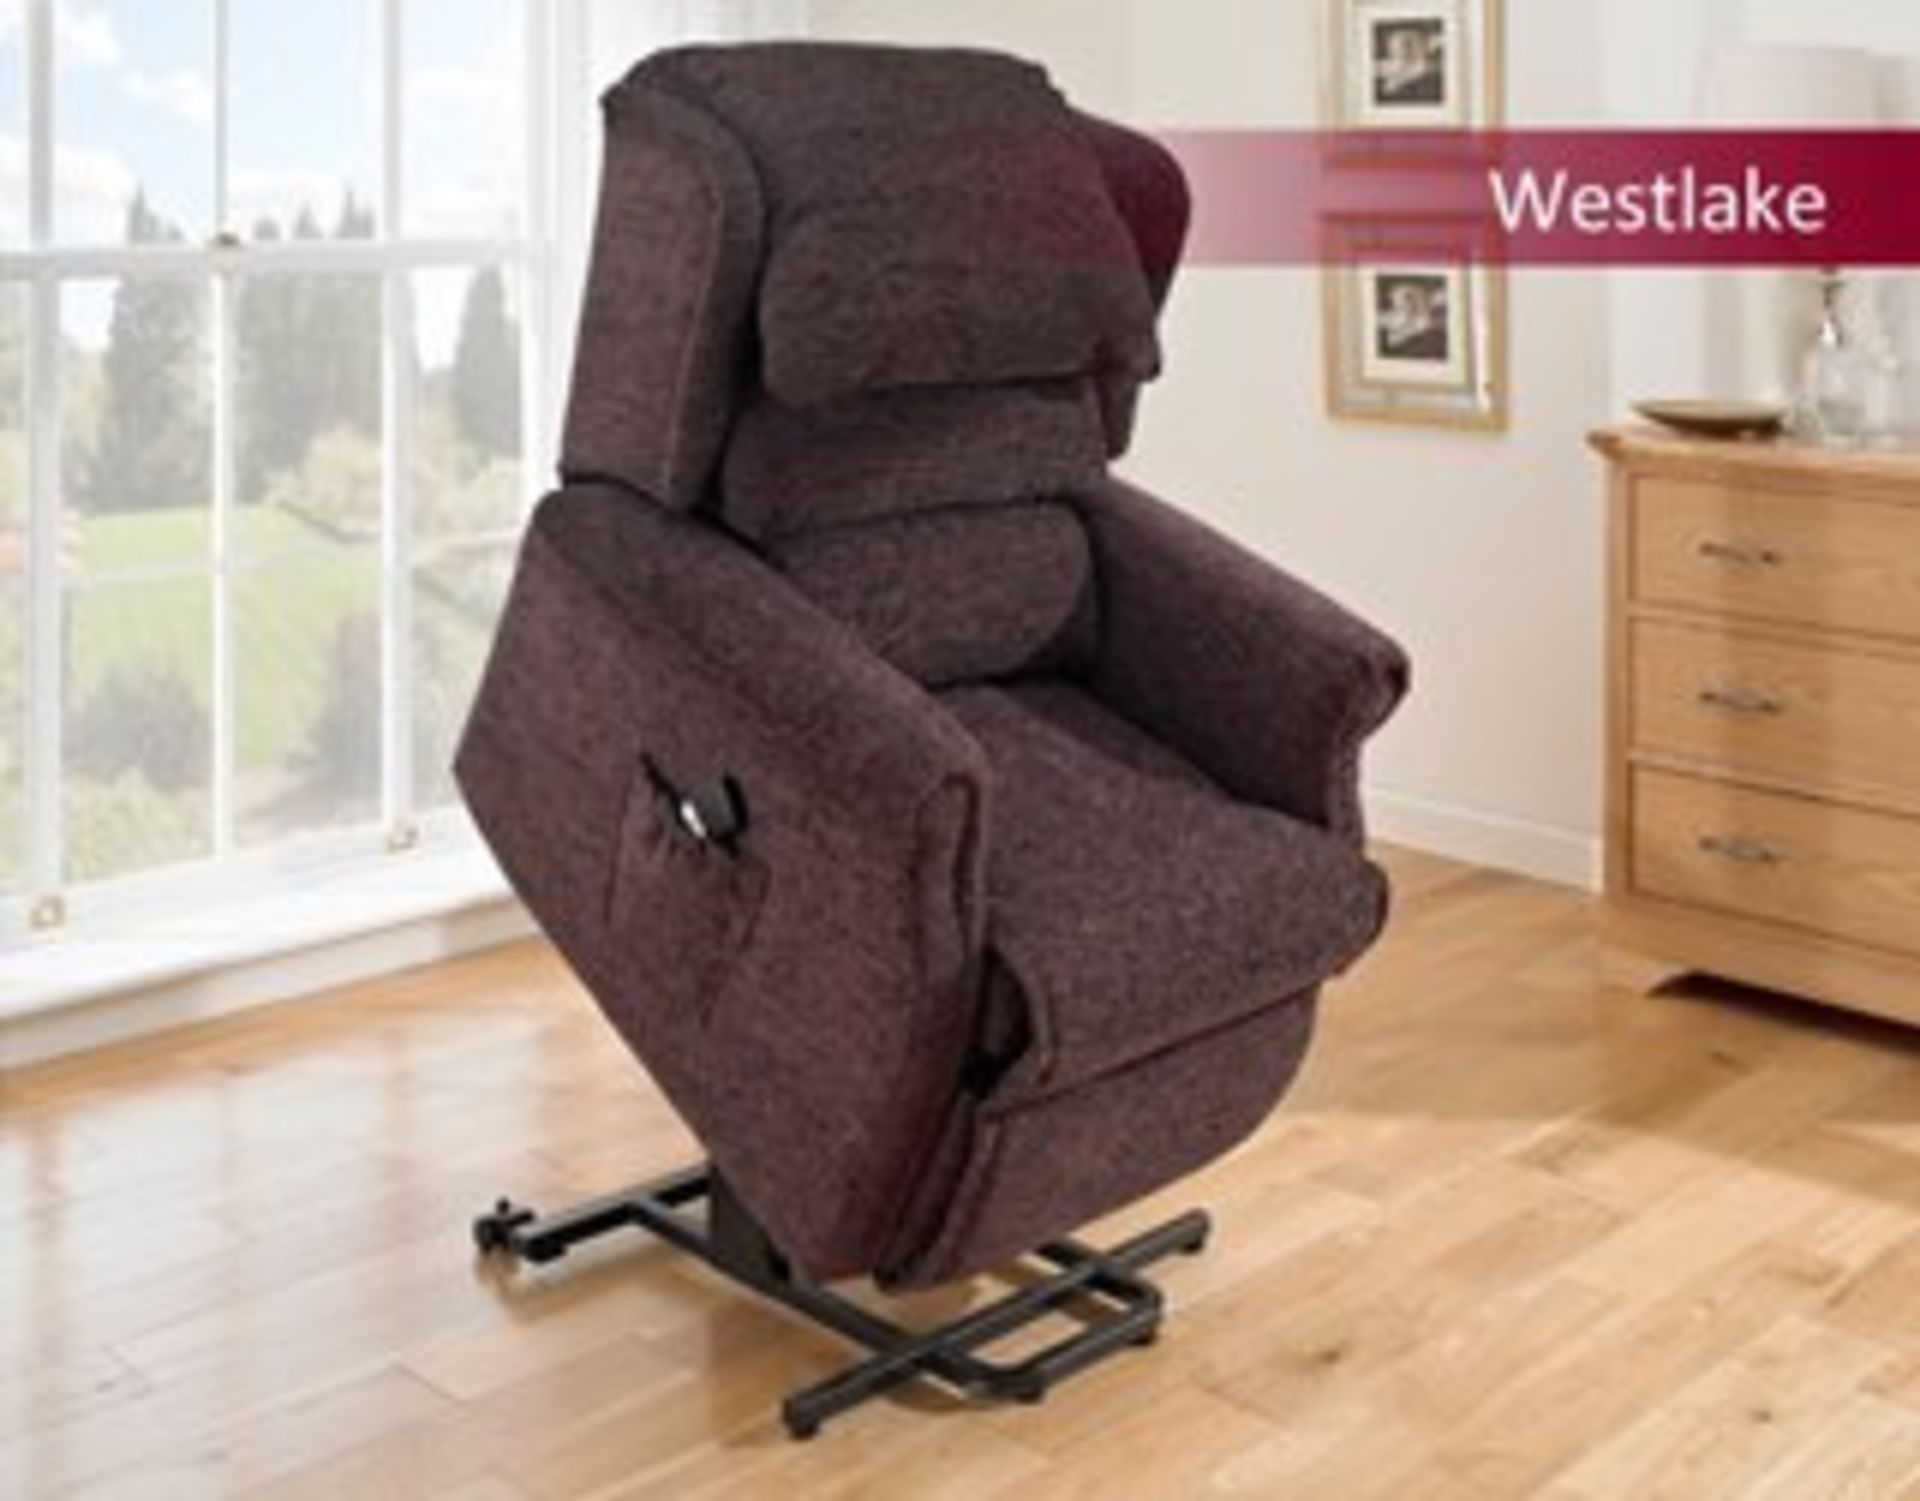 Brand new boxed direct from the manufacturers Westlake rise and recline electric chair